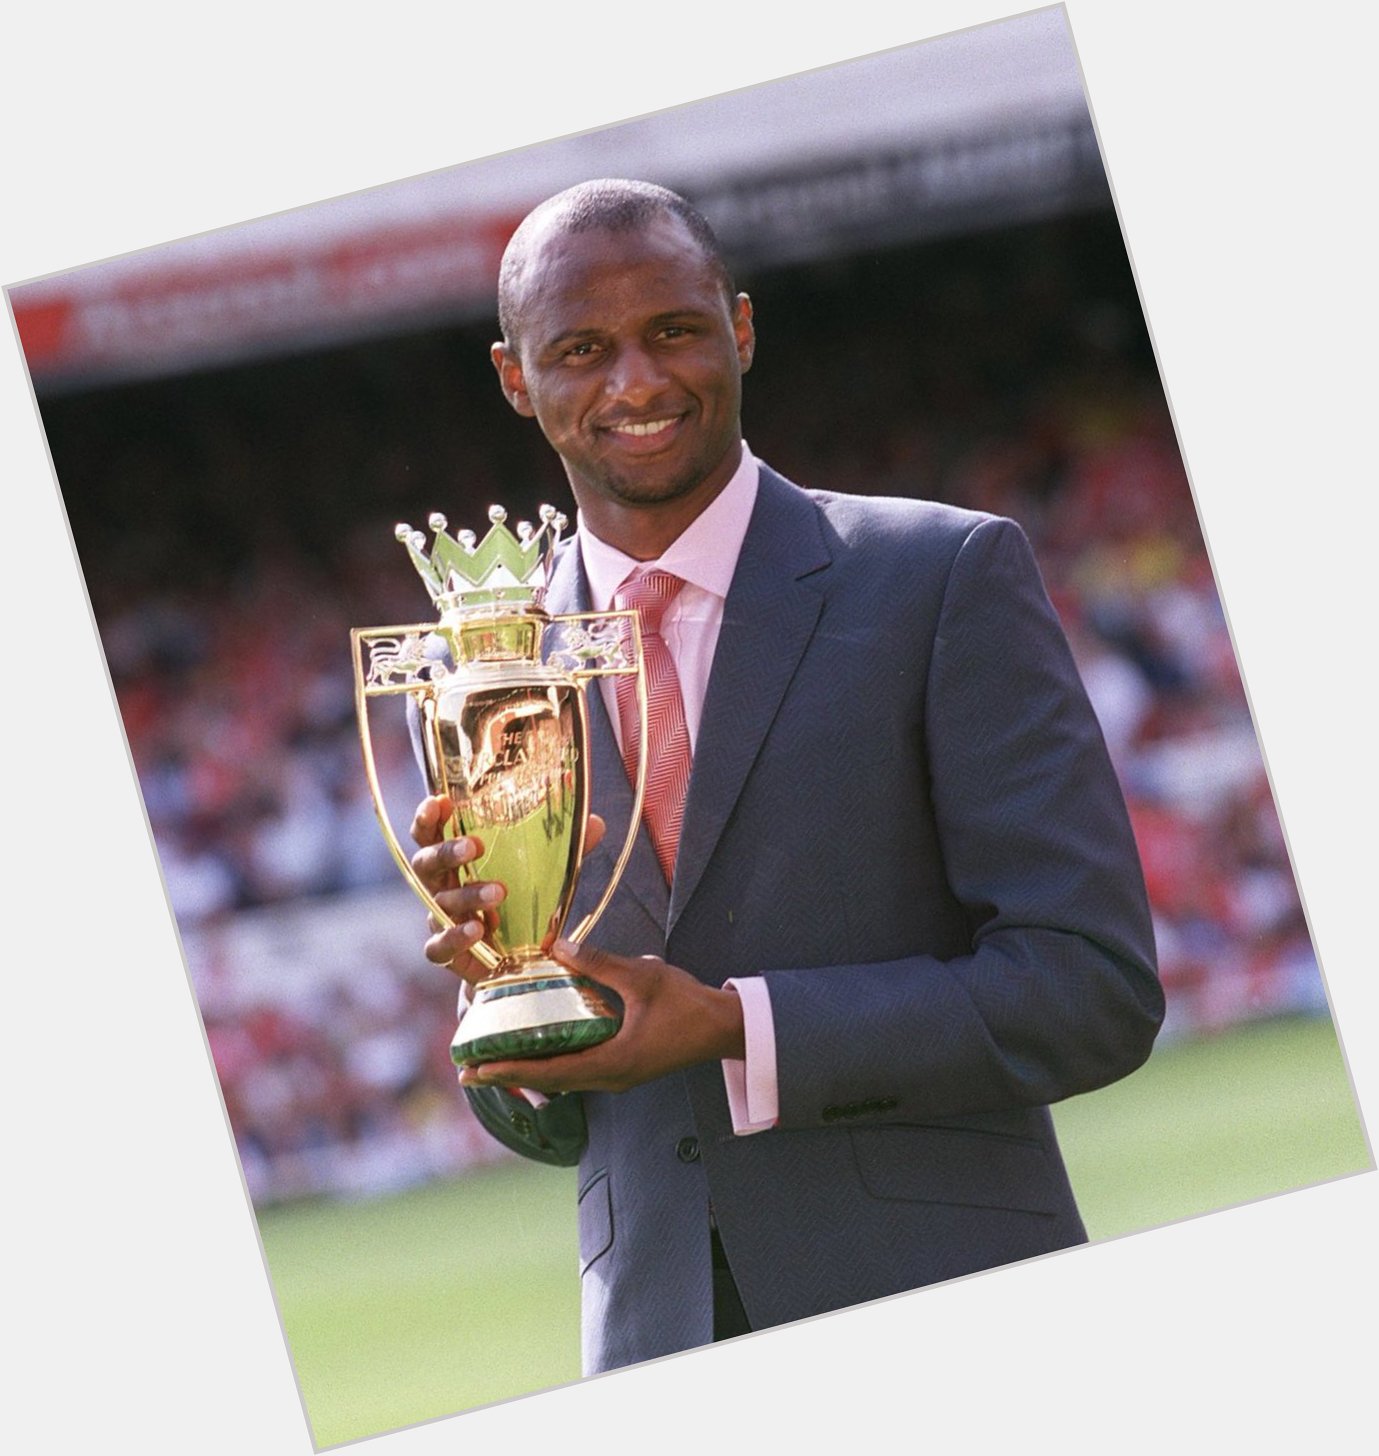 Happy birthday to one of the best midfielders in the world, a true Arsenal Legend, Patrick Vieira. 